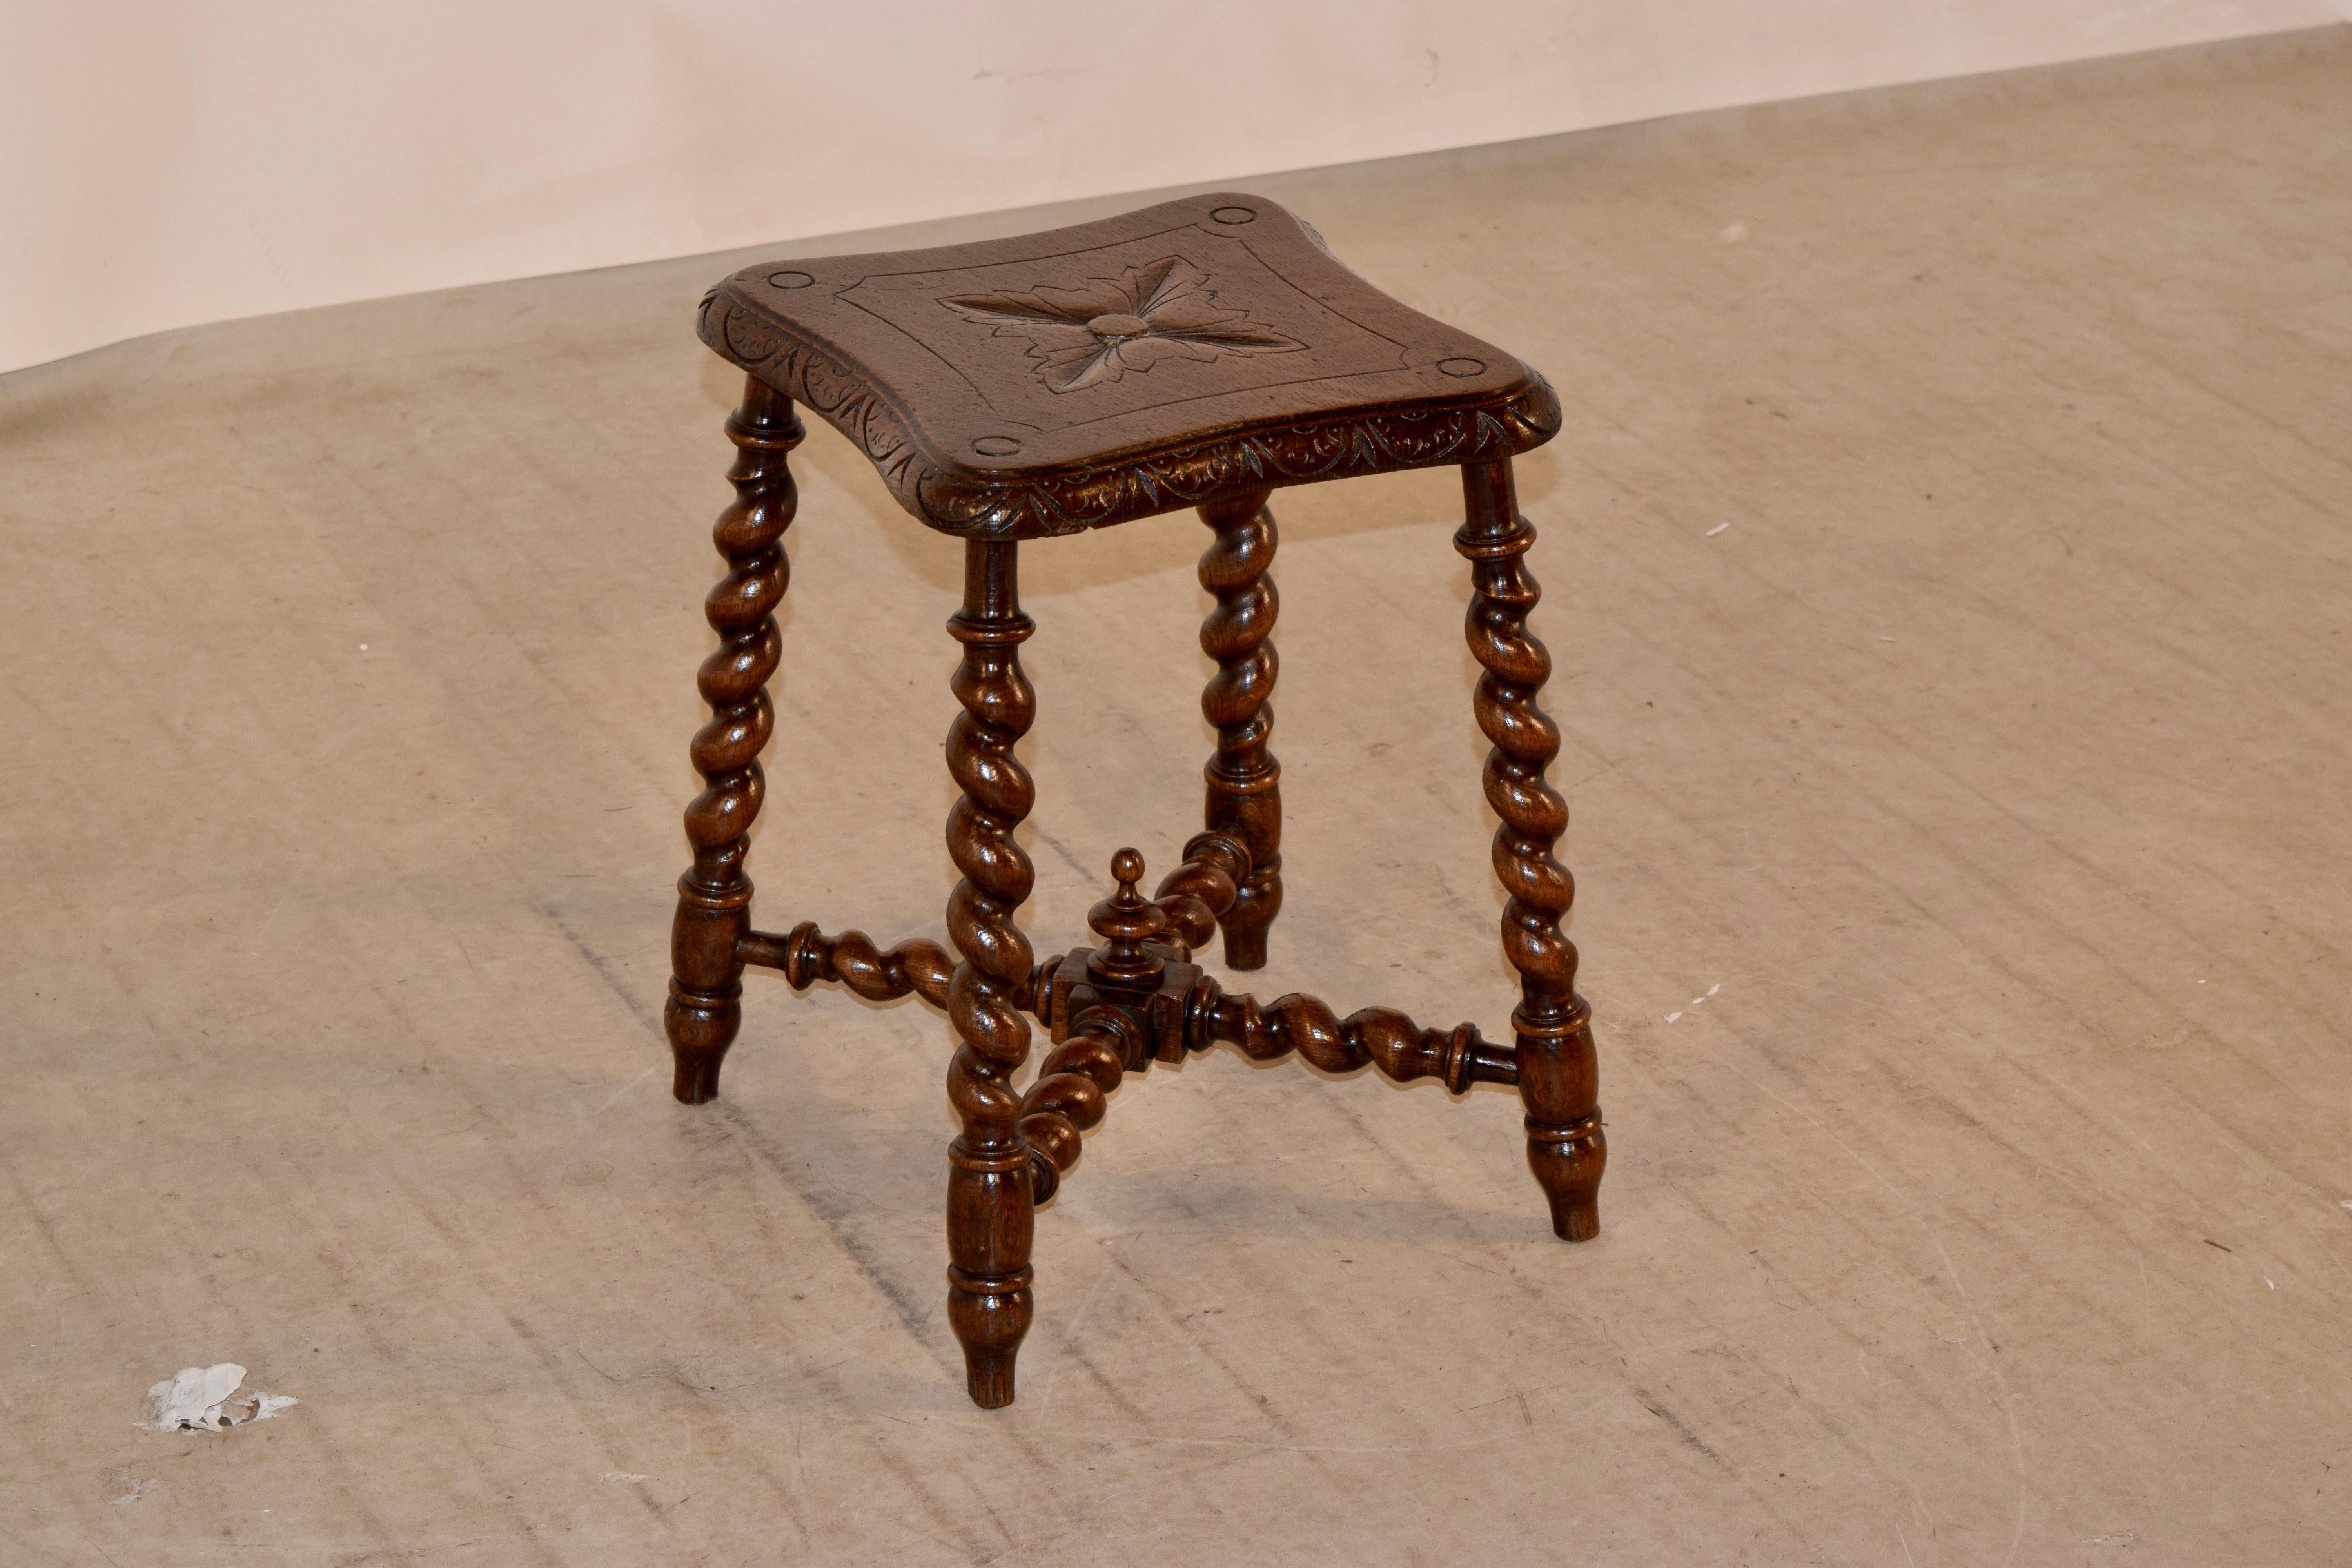 19th century oak stool from England with a shaped top which has a beveled and carved decorated edge and carved decorated top. The legs are hand turned barley twist, and are joined by matching stretchers, decorated with a hand turned finial.